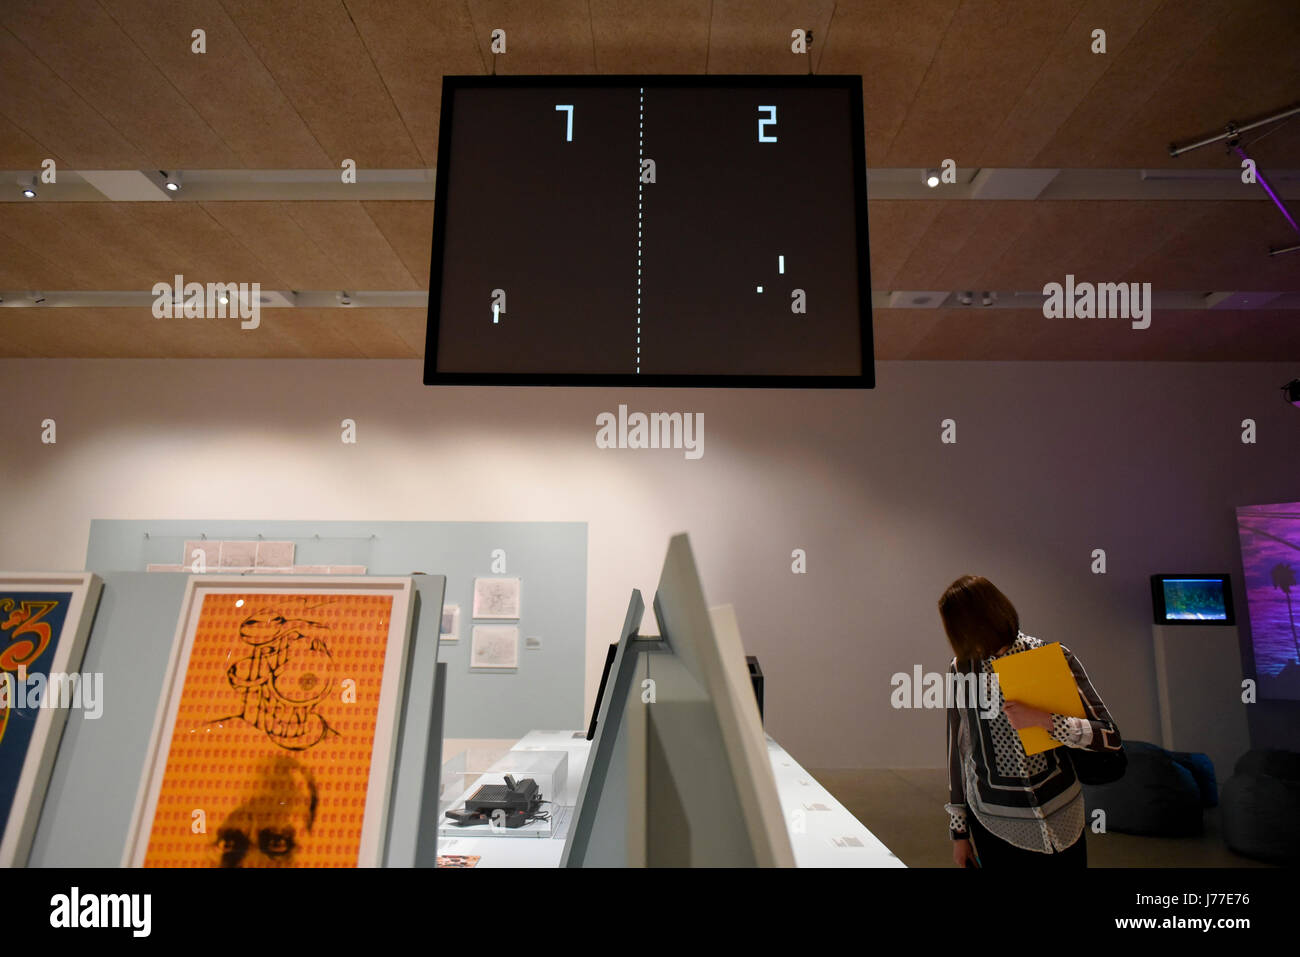 London, UK.  23 May 2017. A video monitor shows a game of PONG being played, deemed to be the first computer game.  Press preview of 'California Designing Freedom', an exhibition at the Design Museum celebrating the history of products designed in California from the 1960s to the current day.  The exhibition runs from 24 May to 15 October 2017.     Credit: Stephen Chung / Alamy Live News Stock Photo